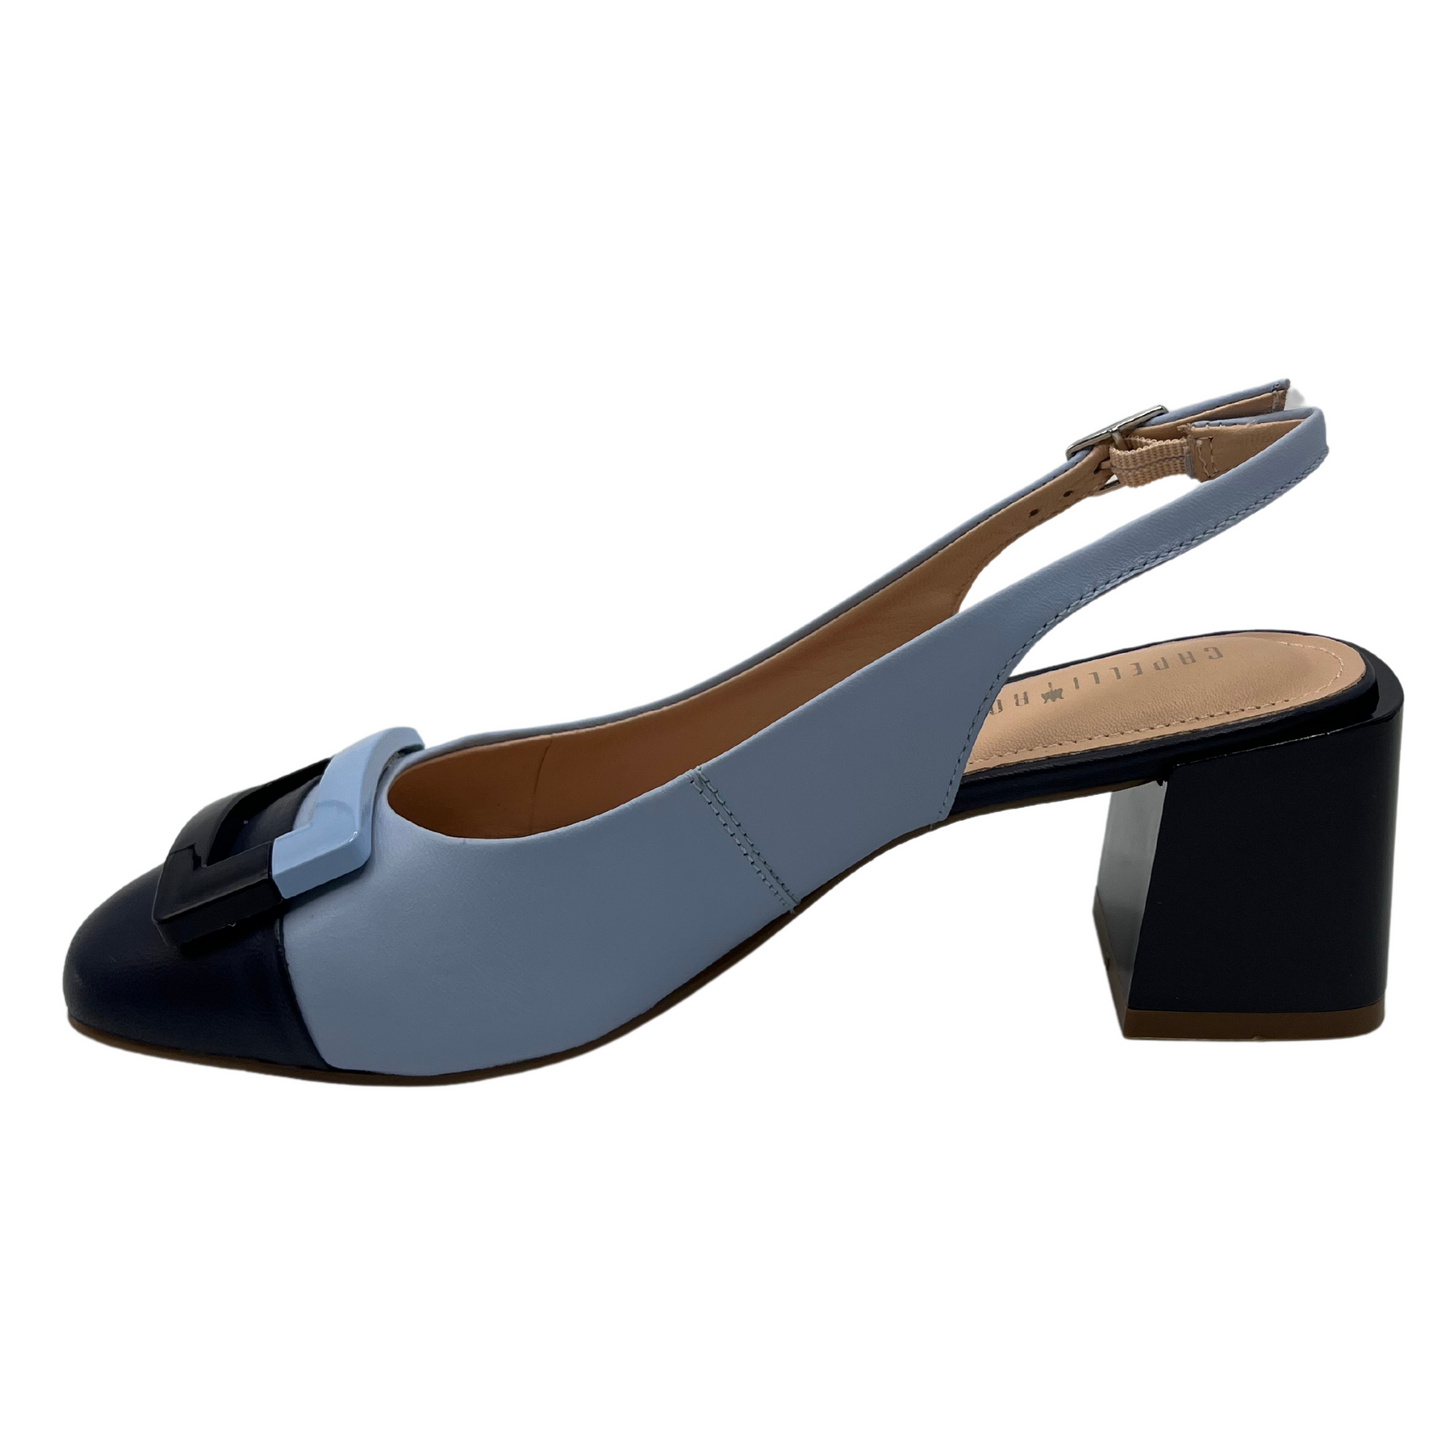 Left facing view of light blue and navy slingback heel with block heel and square detail on toe